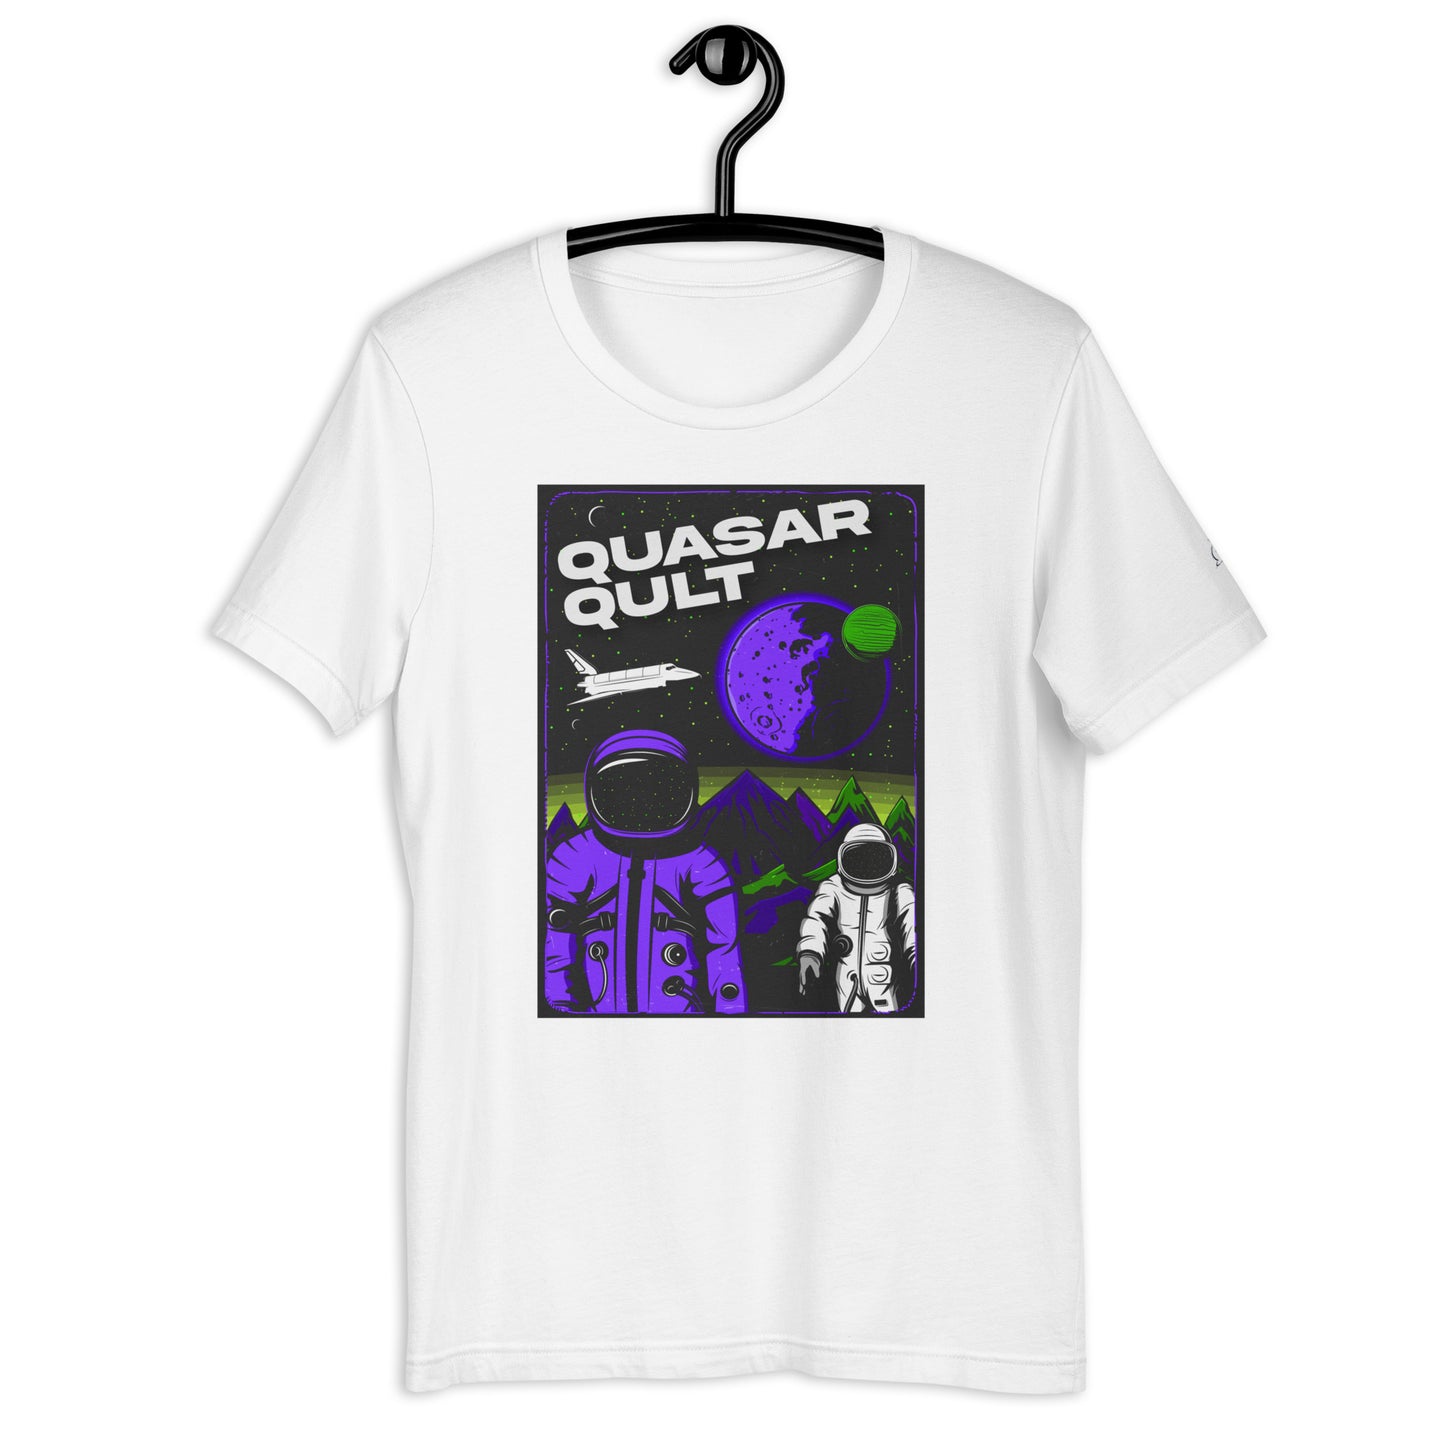 Out Of This World - Quasar Qult